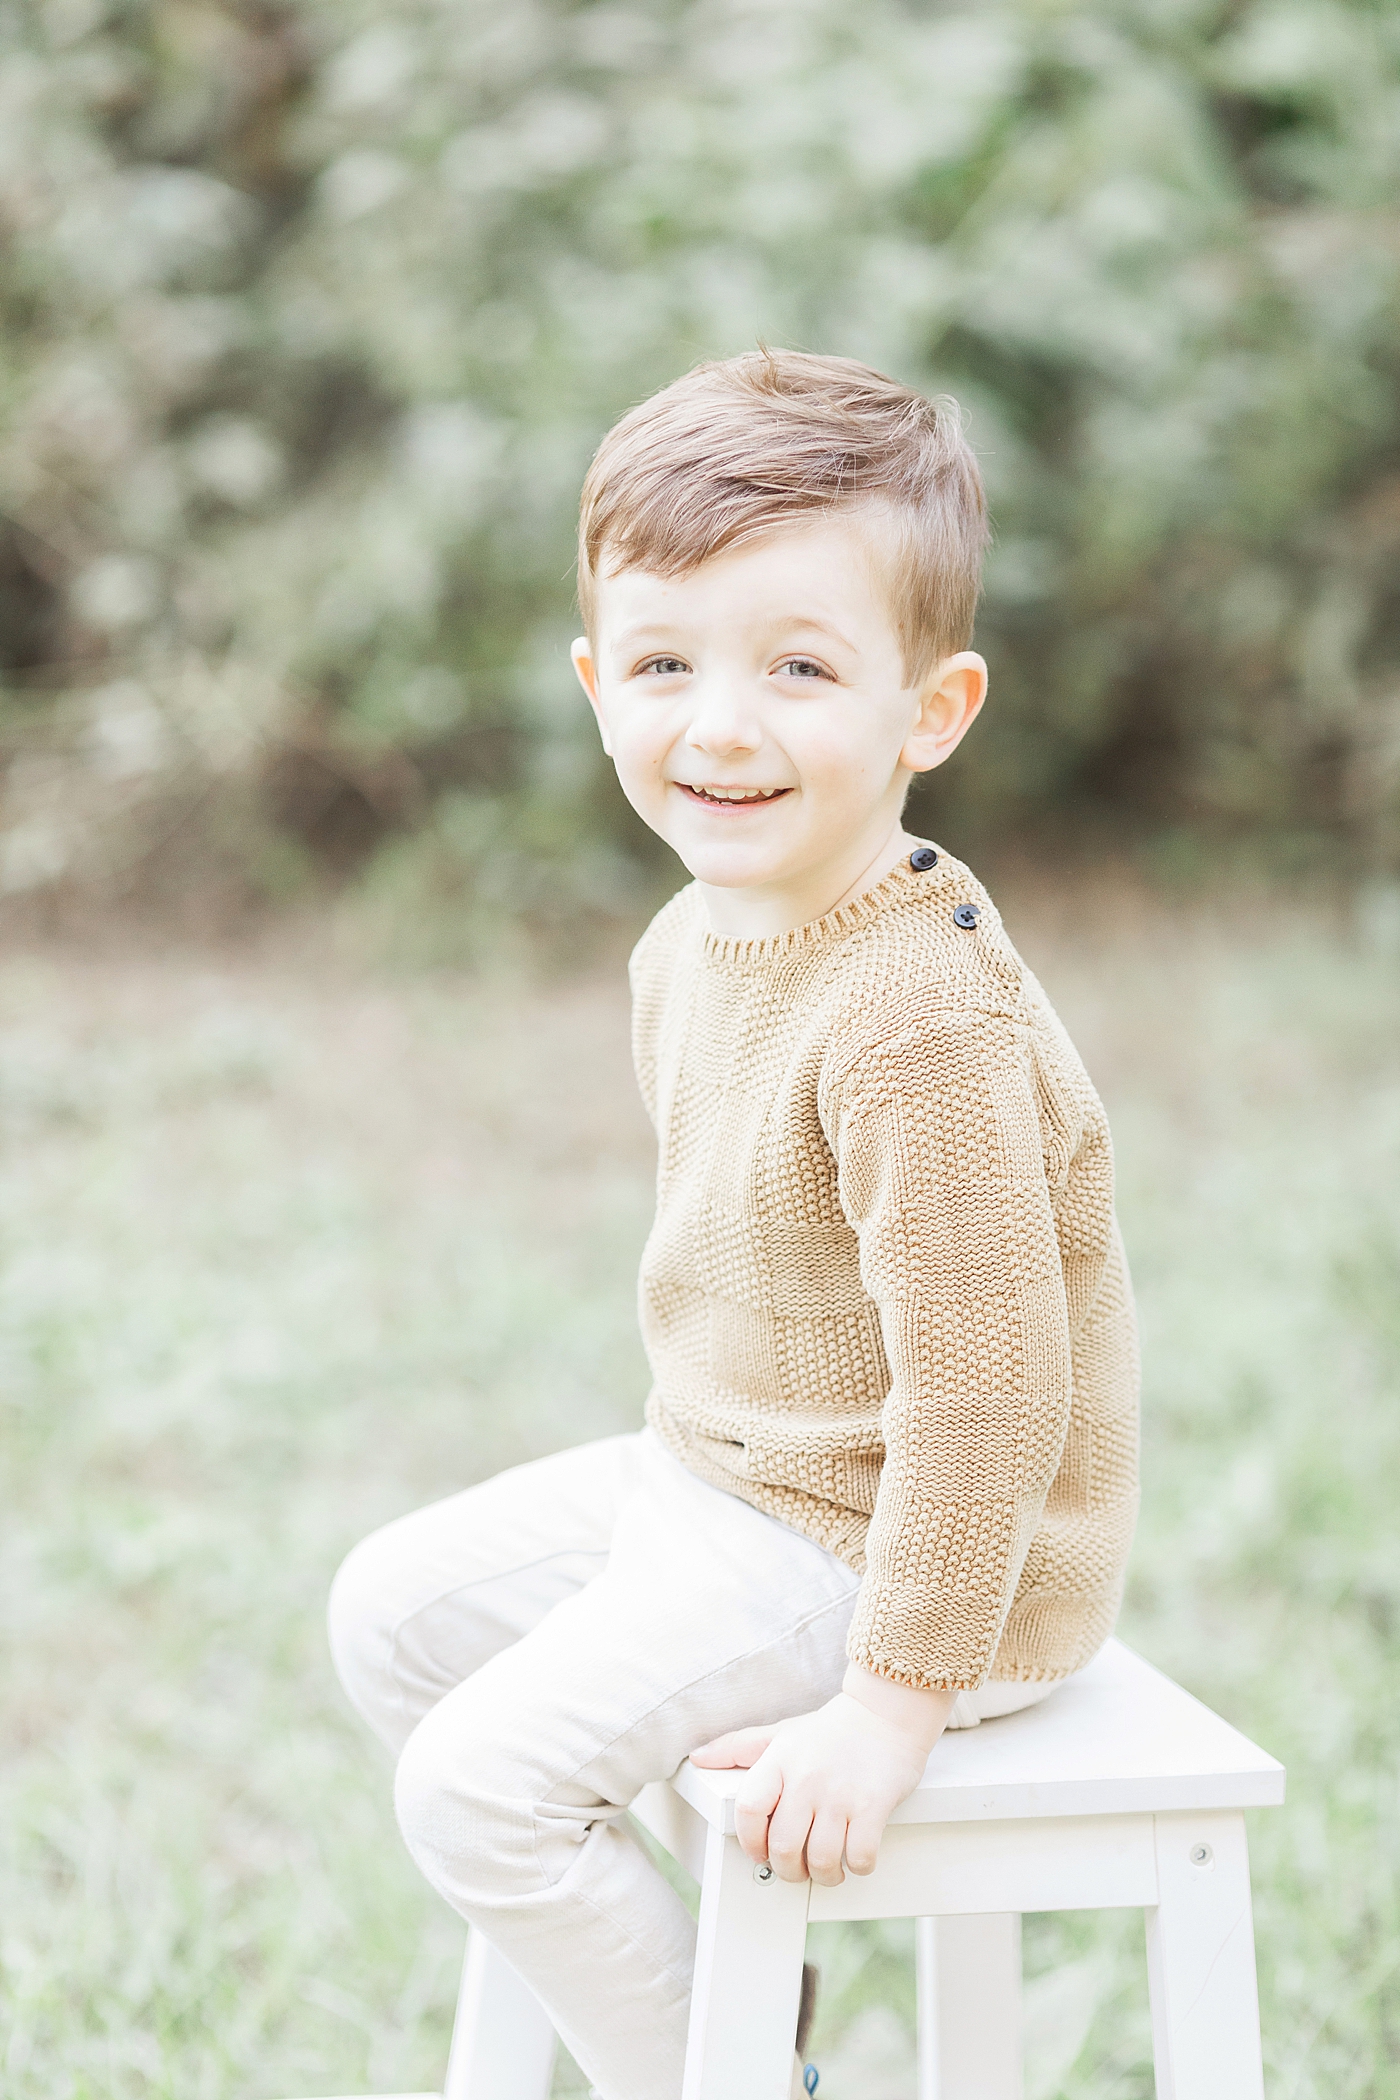 Children's portrait with young boy sitting on a stool smiling. Photo by Fresh Light Photography